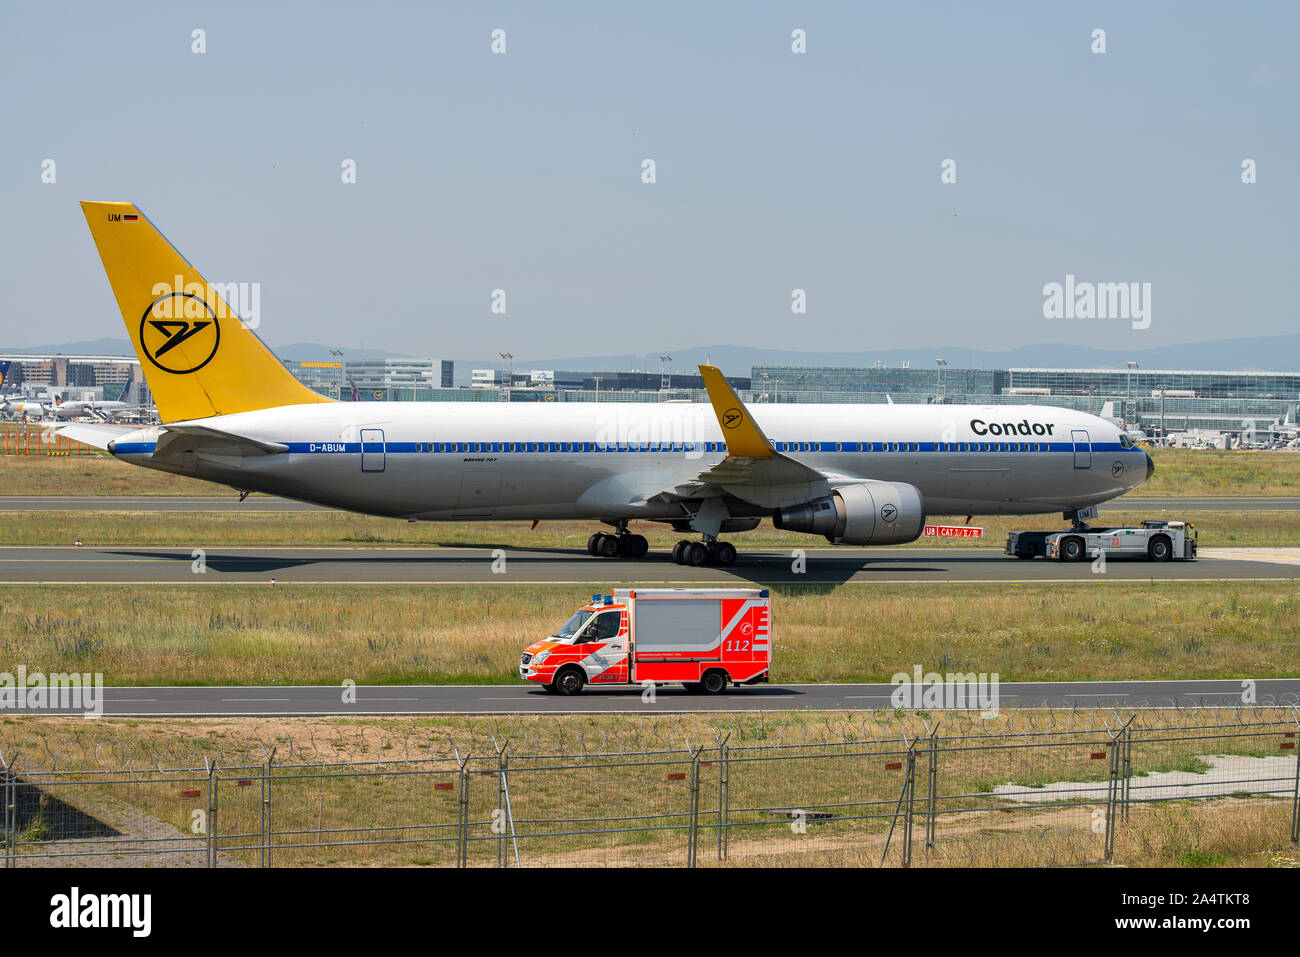 Frankfurt, Hesse/Germany - June 26 2019Condor aircraft with a special painting (Boeing 767-300 - D-ABUM) is towed by an aircraft tractor at Frankfurt Stock Photo